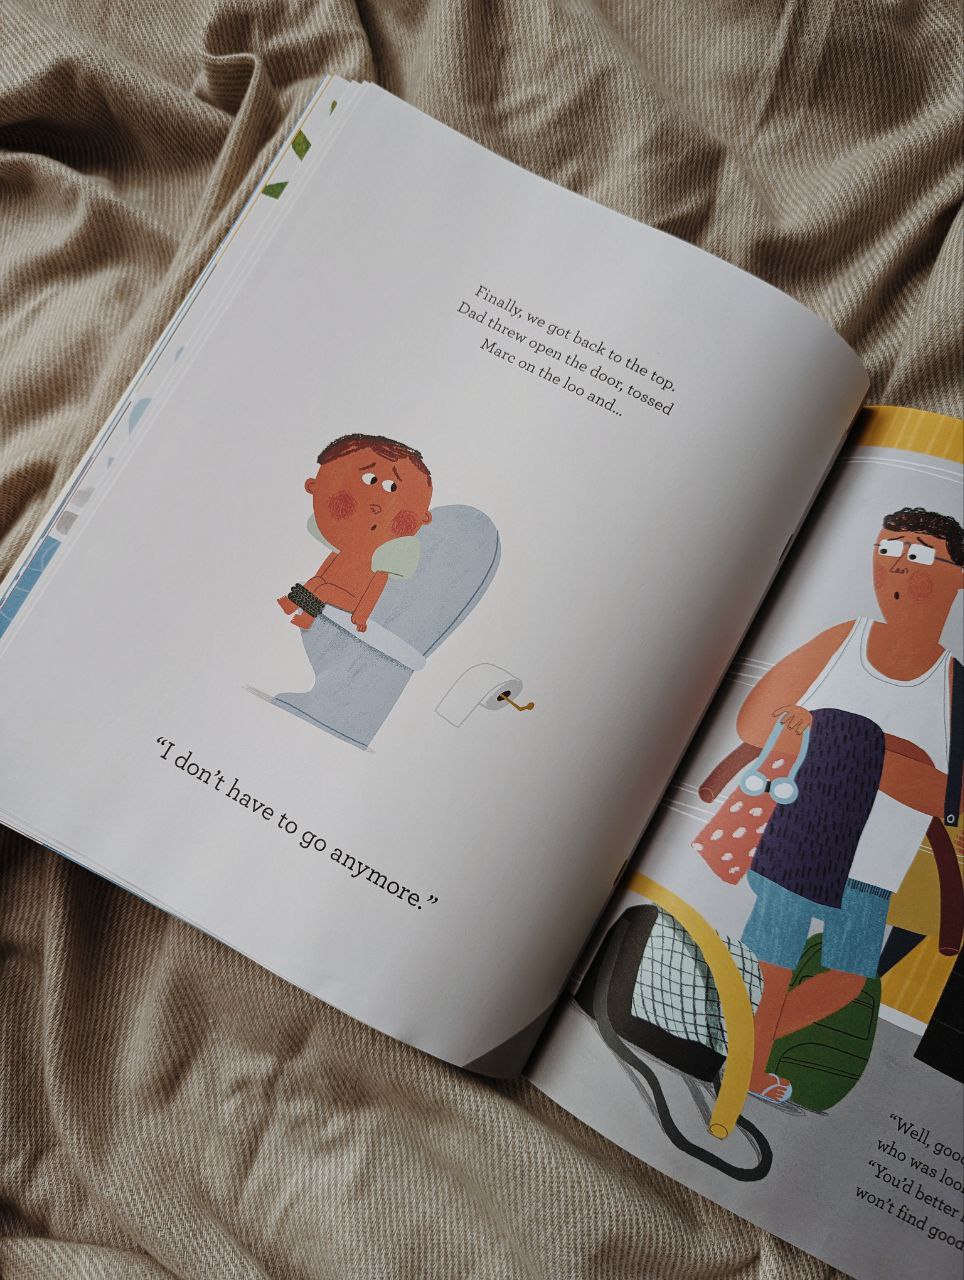 The Boy Who Cried Poo by Alessandra Requena